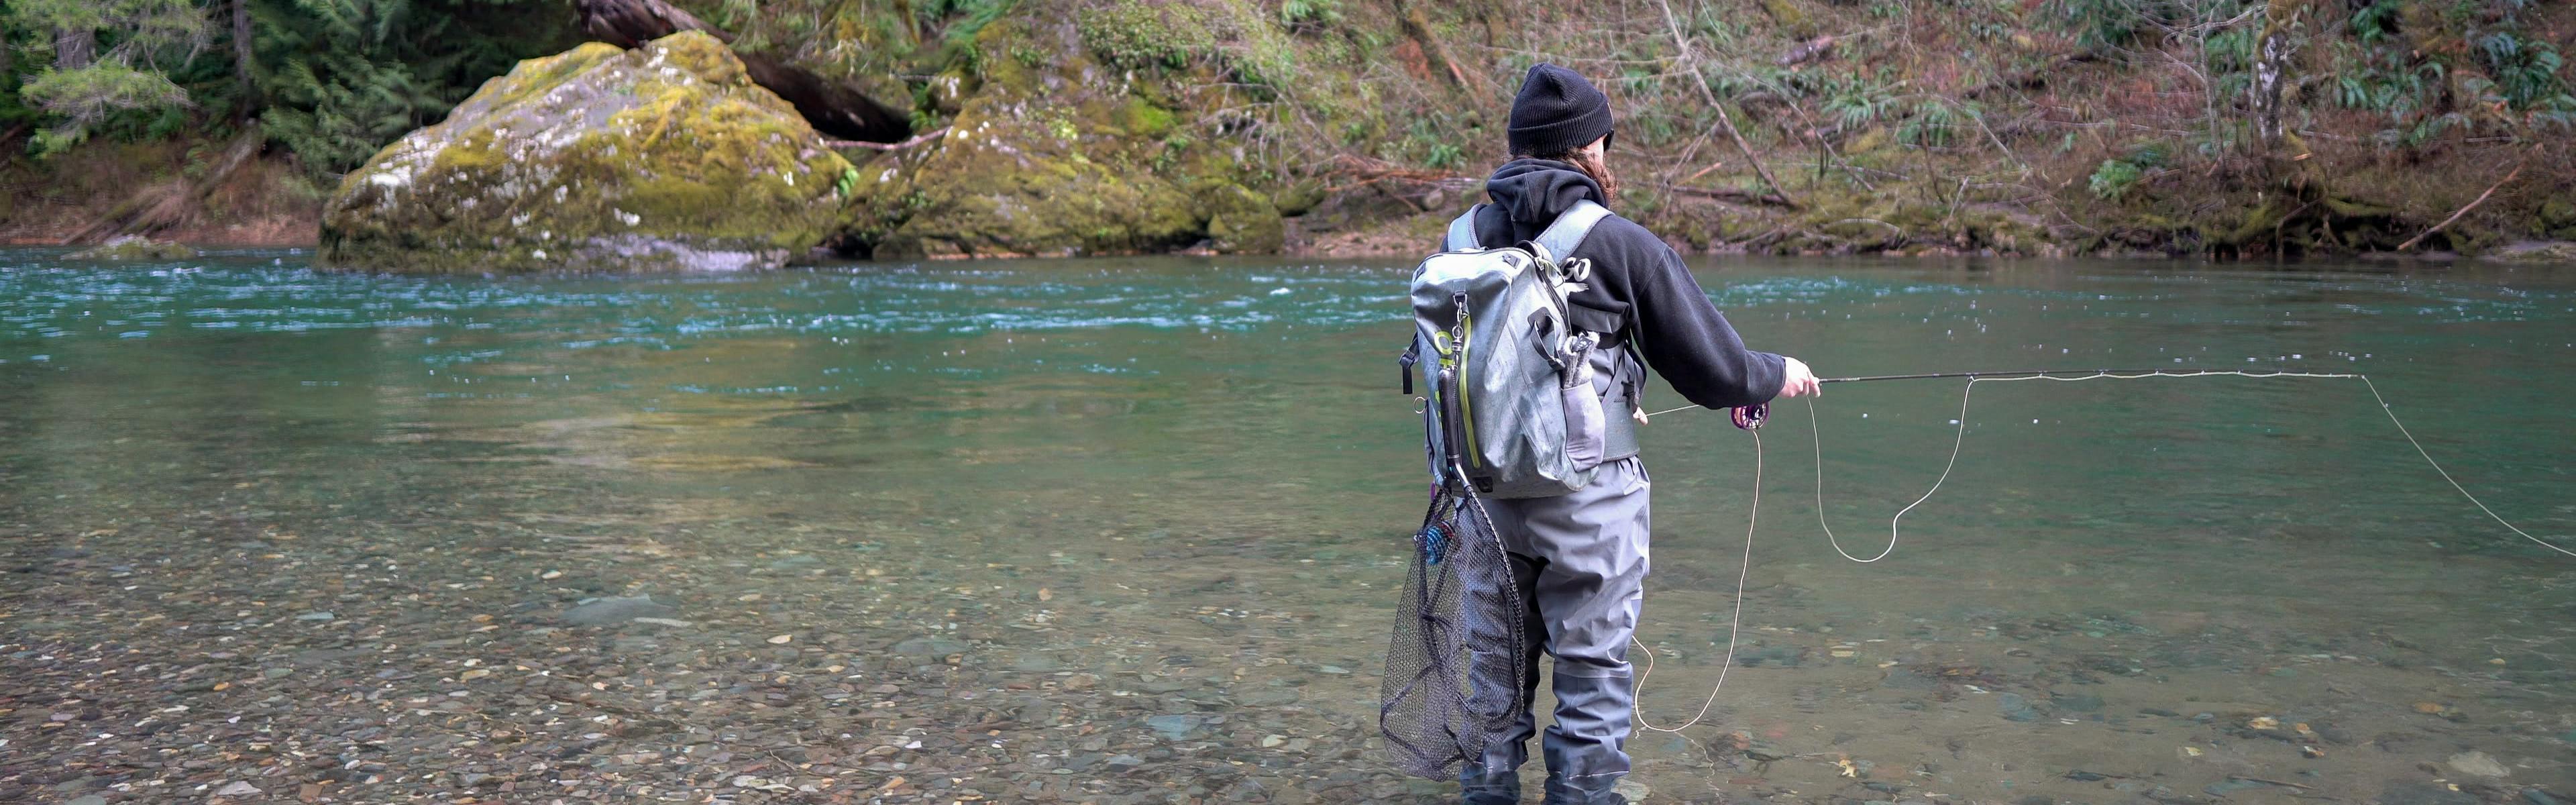 The Best Black Friday Orvis Fly Fishing Deals: Shirts, Packs, Fly-Tying Kits,  Bags, and More